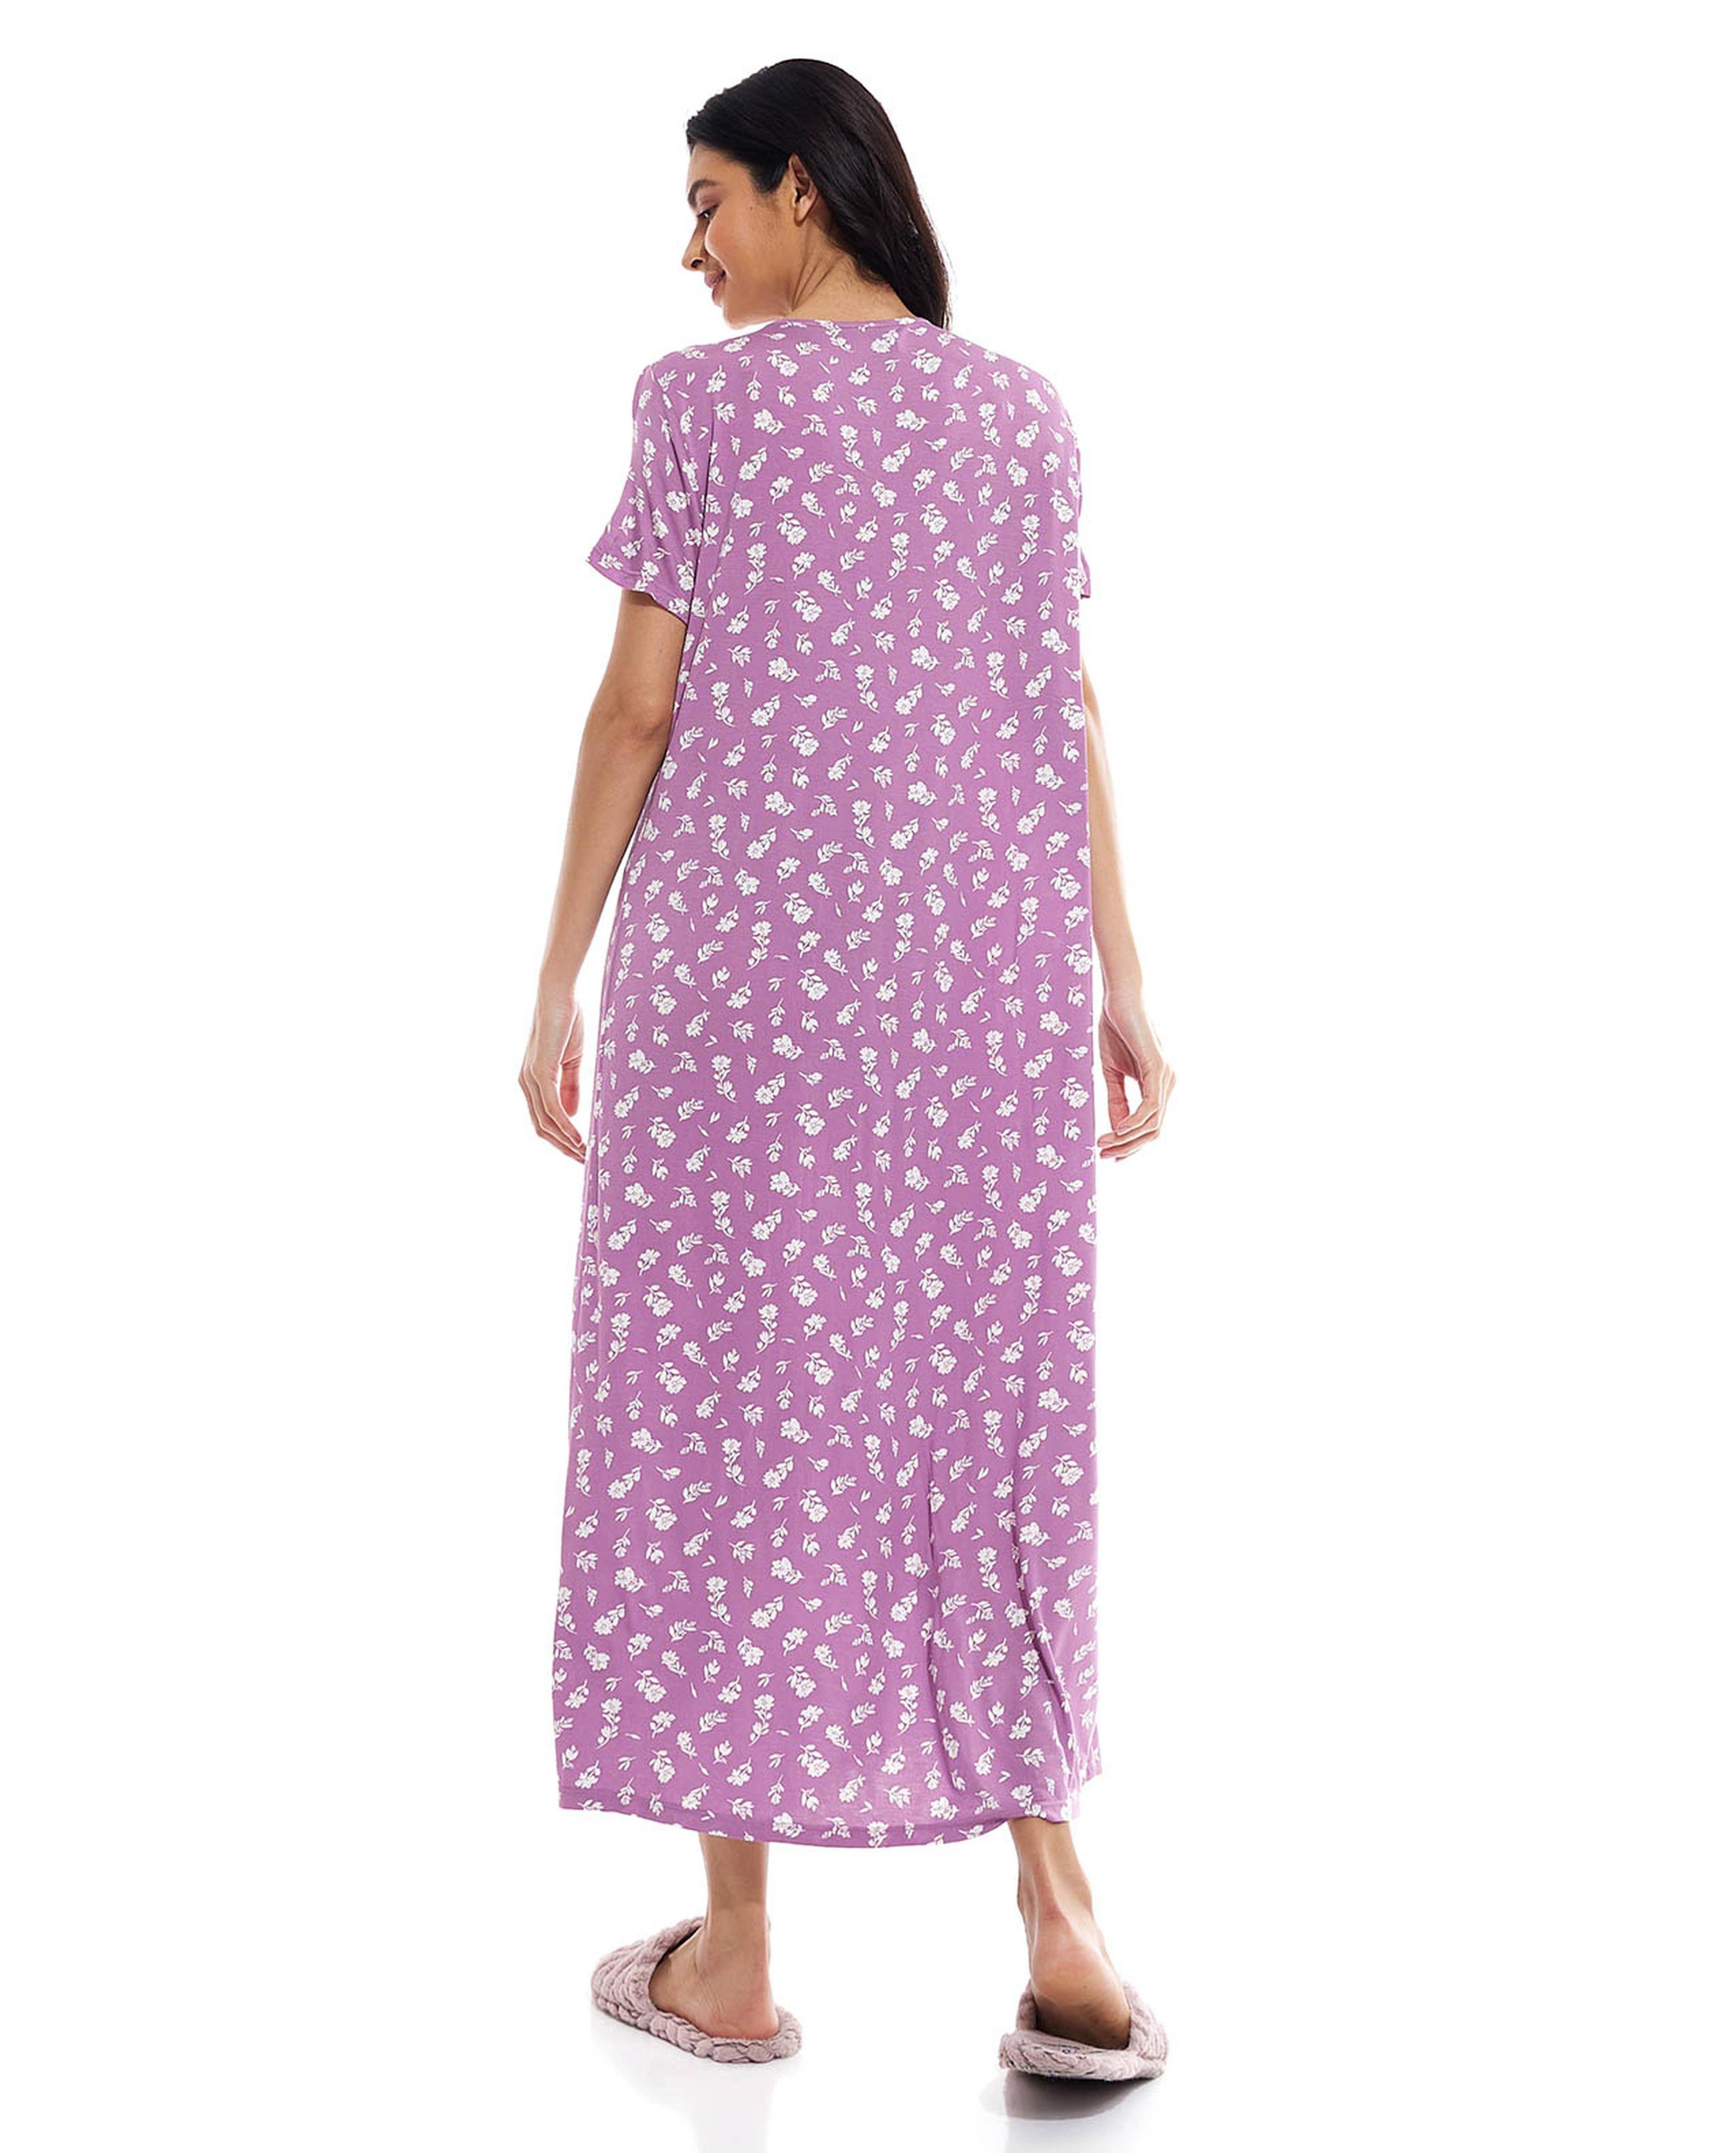 Floral Print Nightgown with V-Neck and Short Sleeves